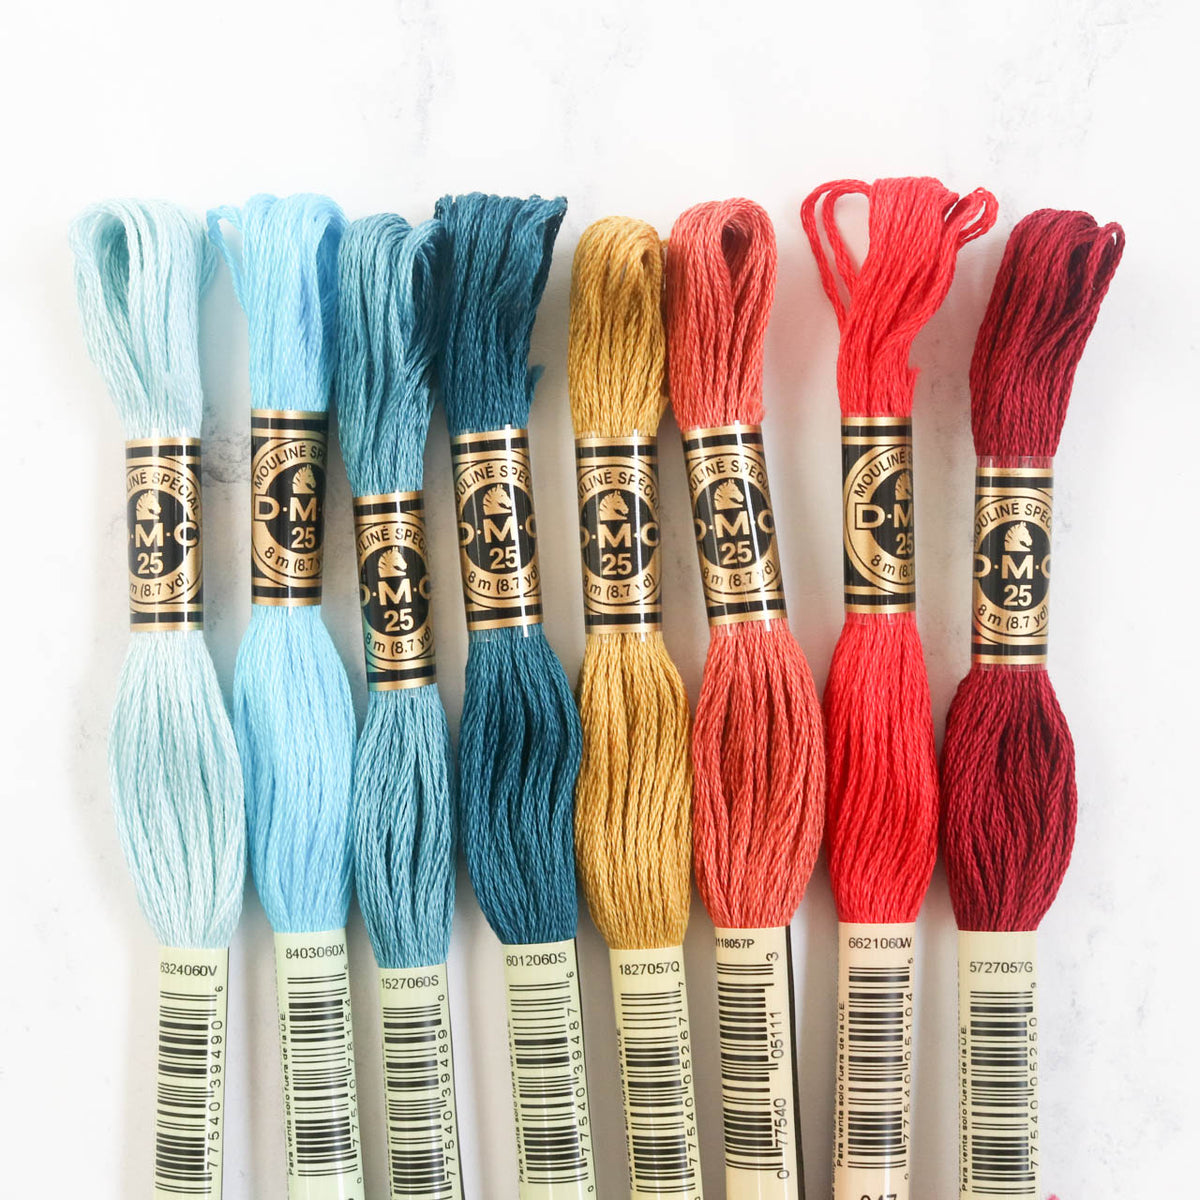 DMC Embroidery Floss Color Palette - Vintage Tins - Stitched Modern